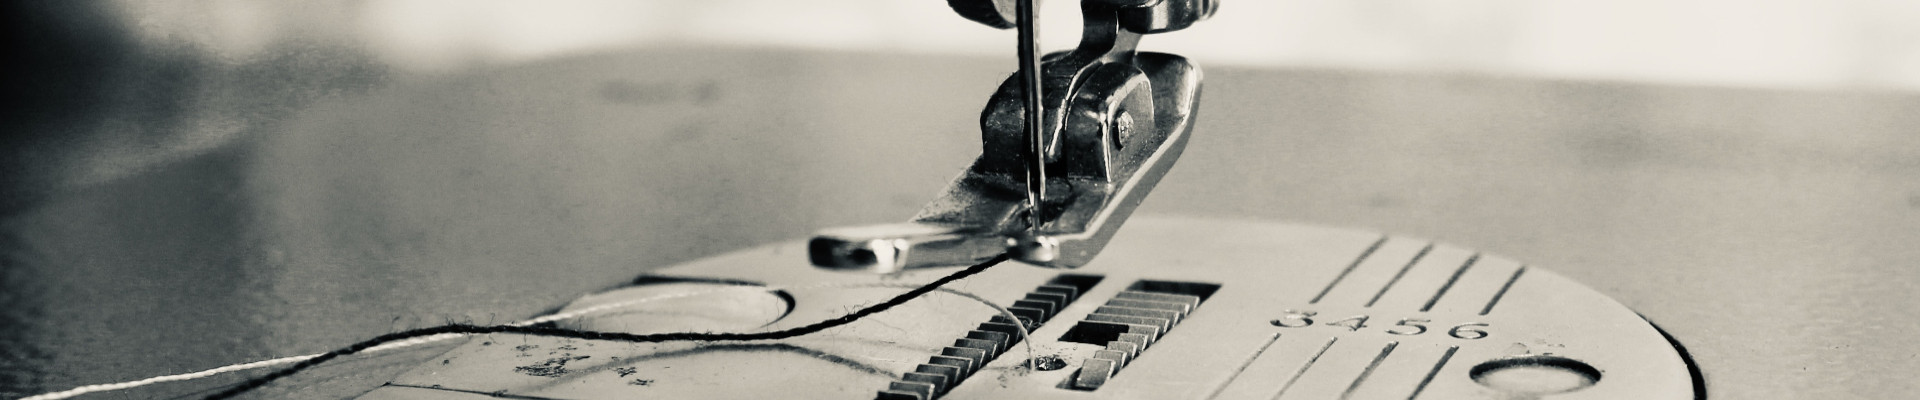 sewing industry, product development, home textiles, consultations